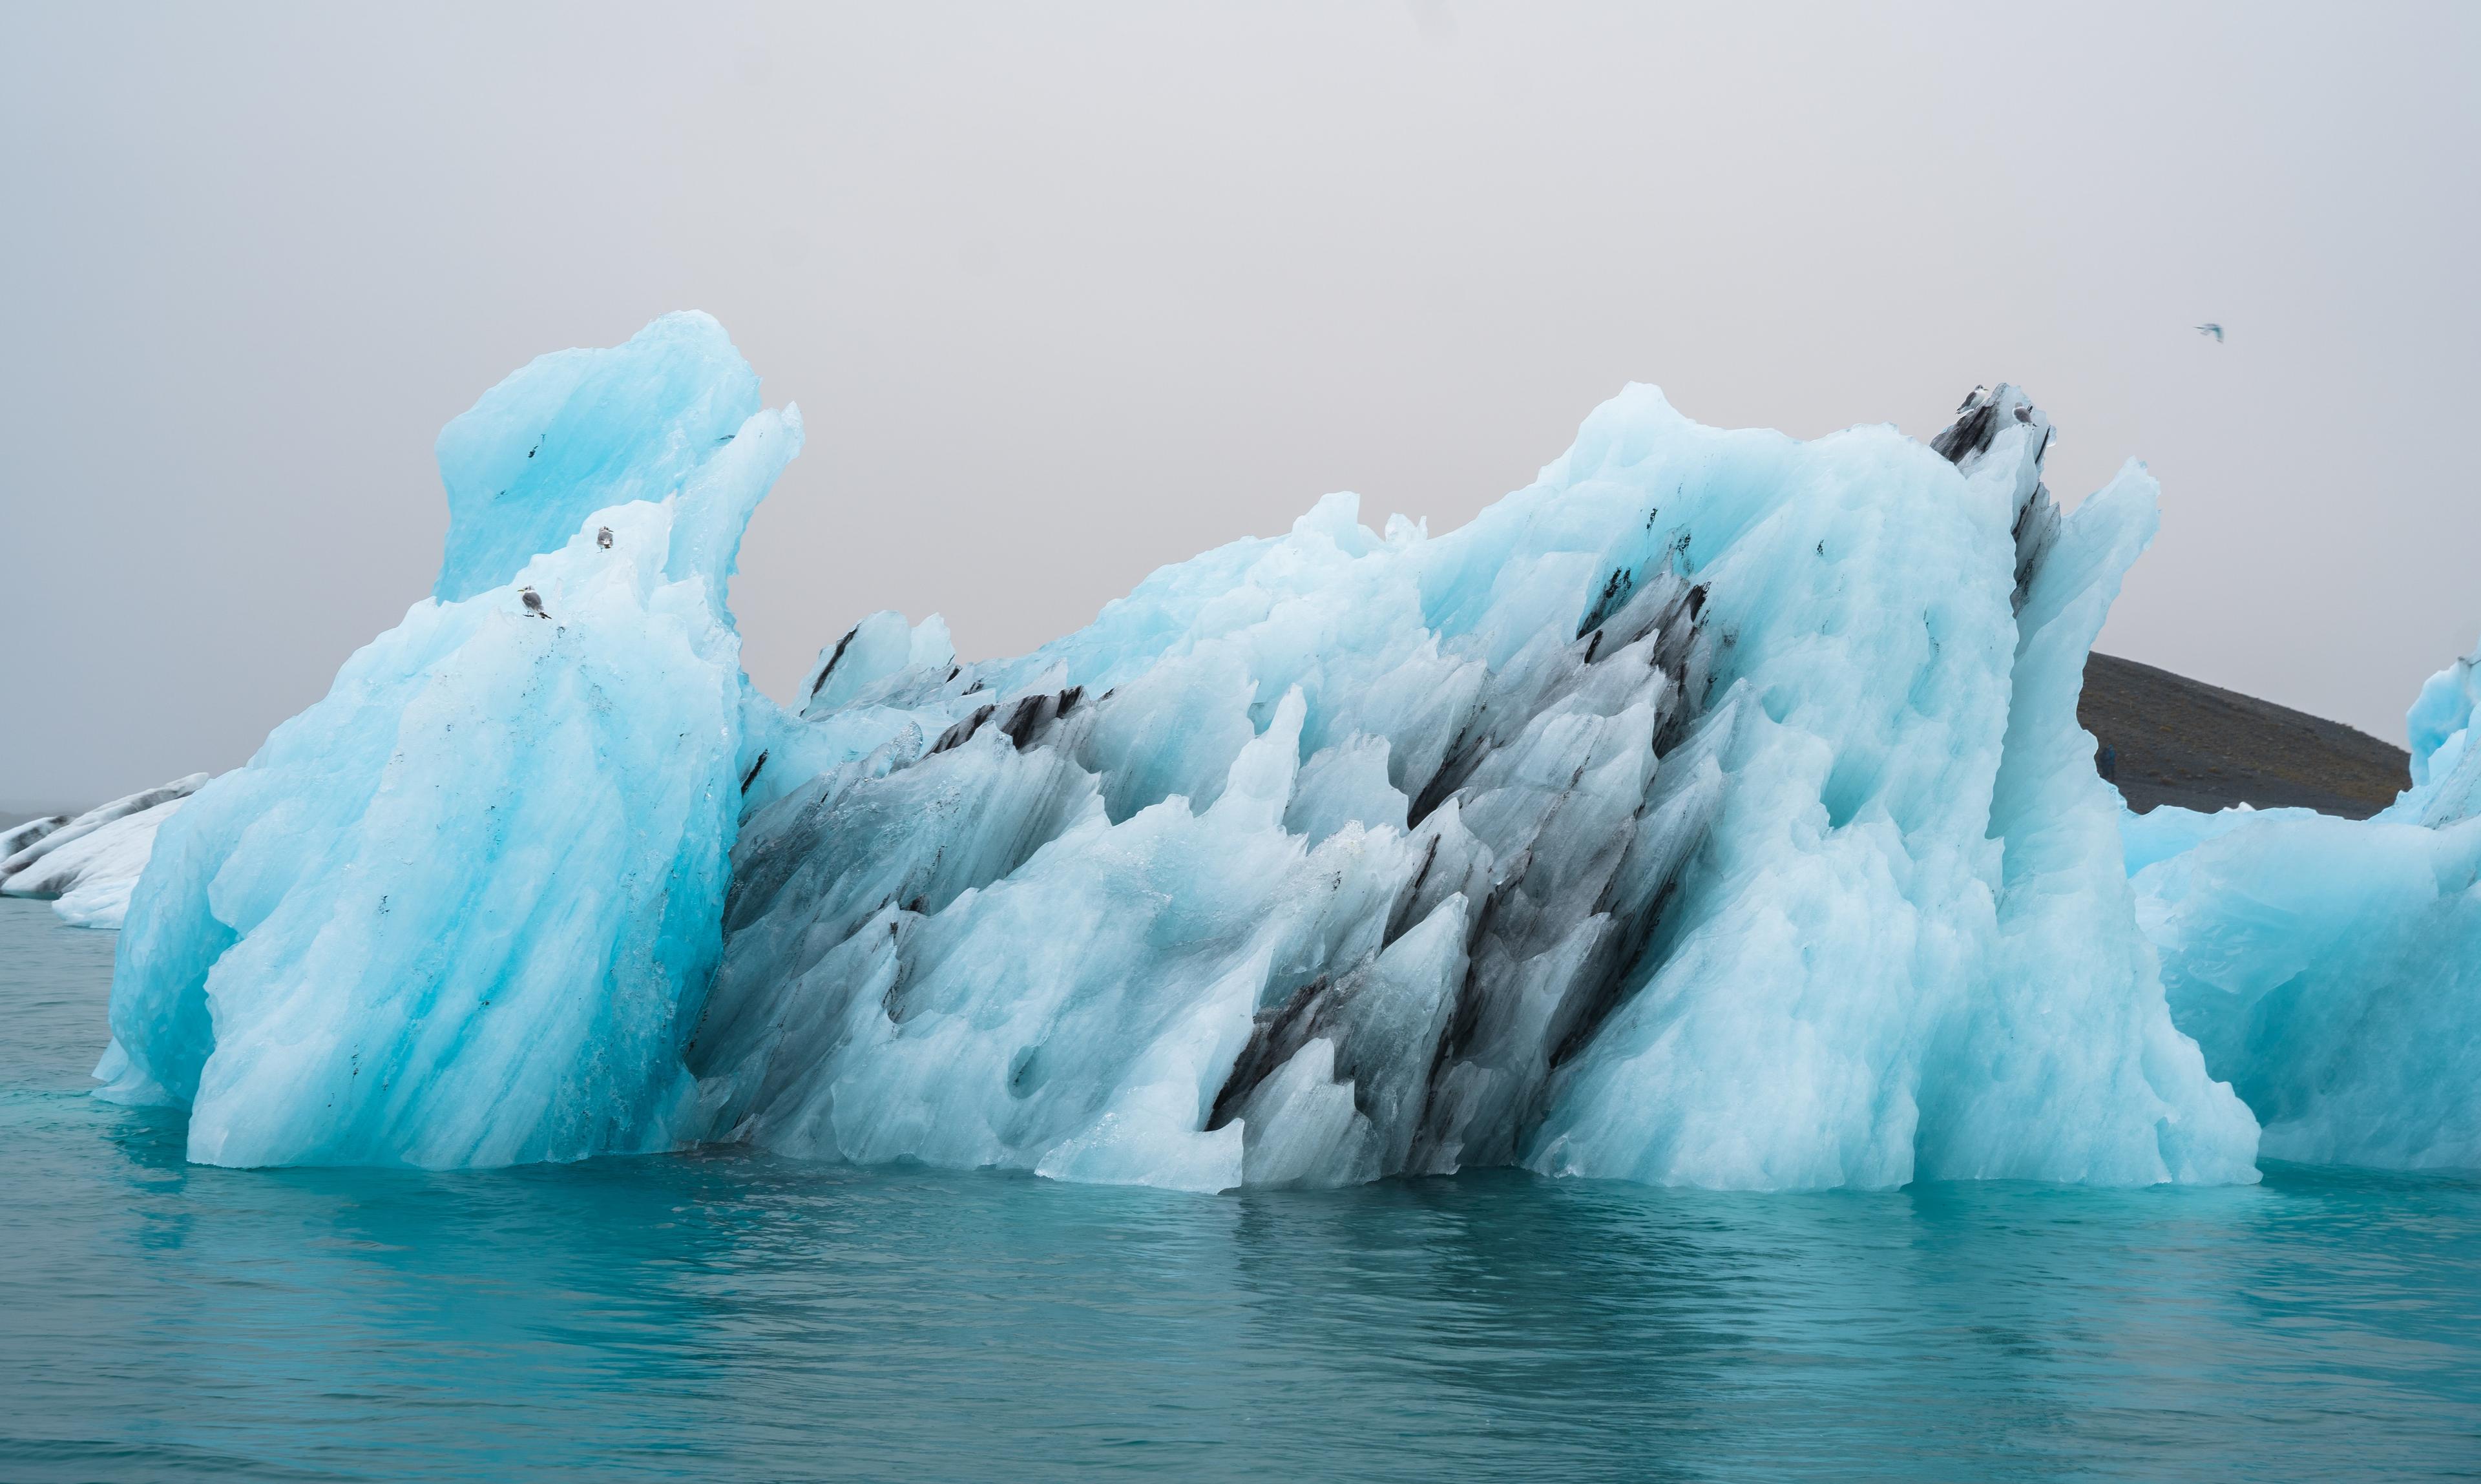 A craggy ice berg floating on the lake, displaying all hues of blue and enriched with black ash layers